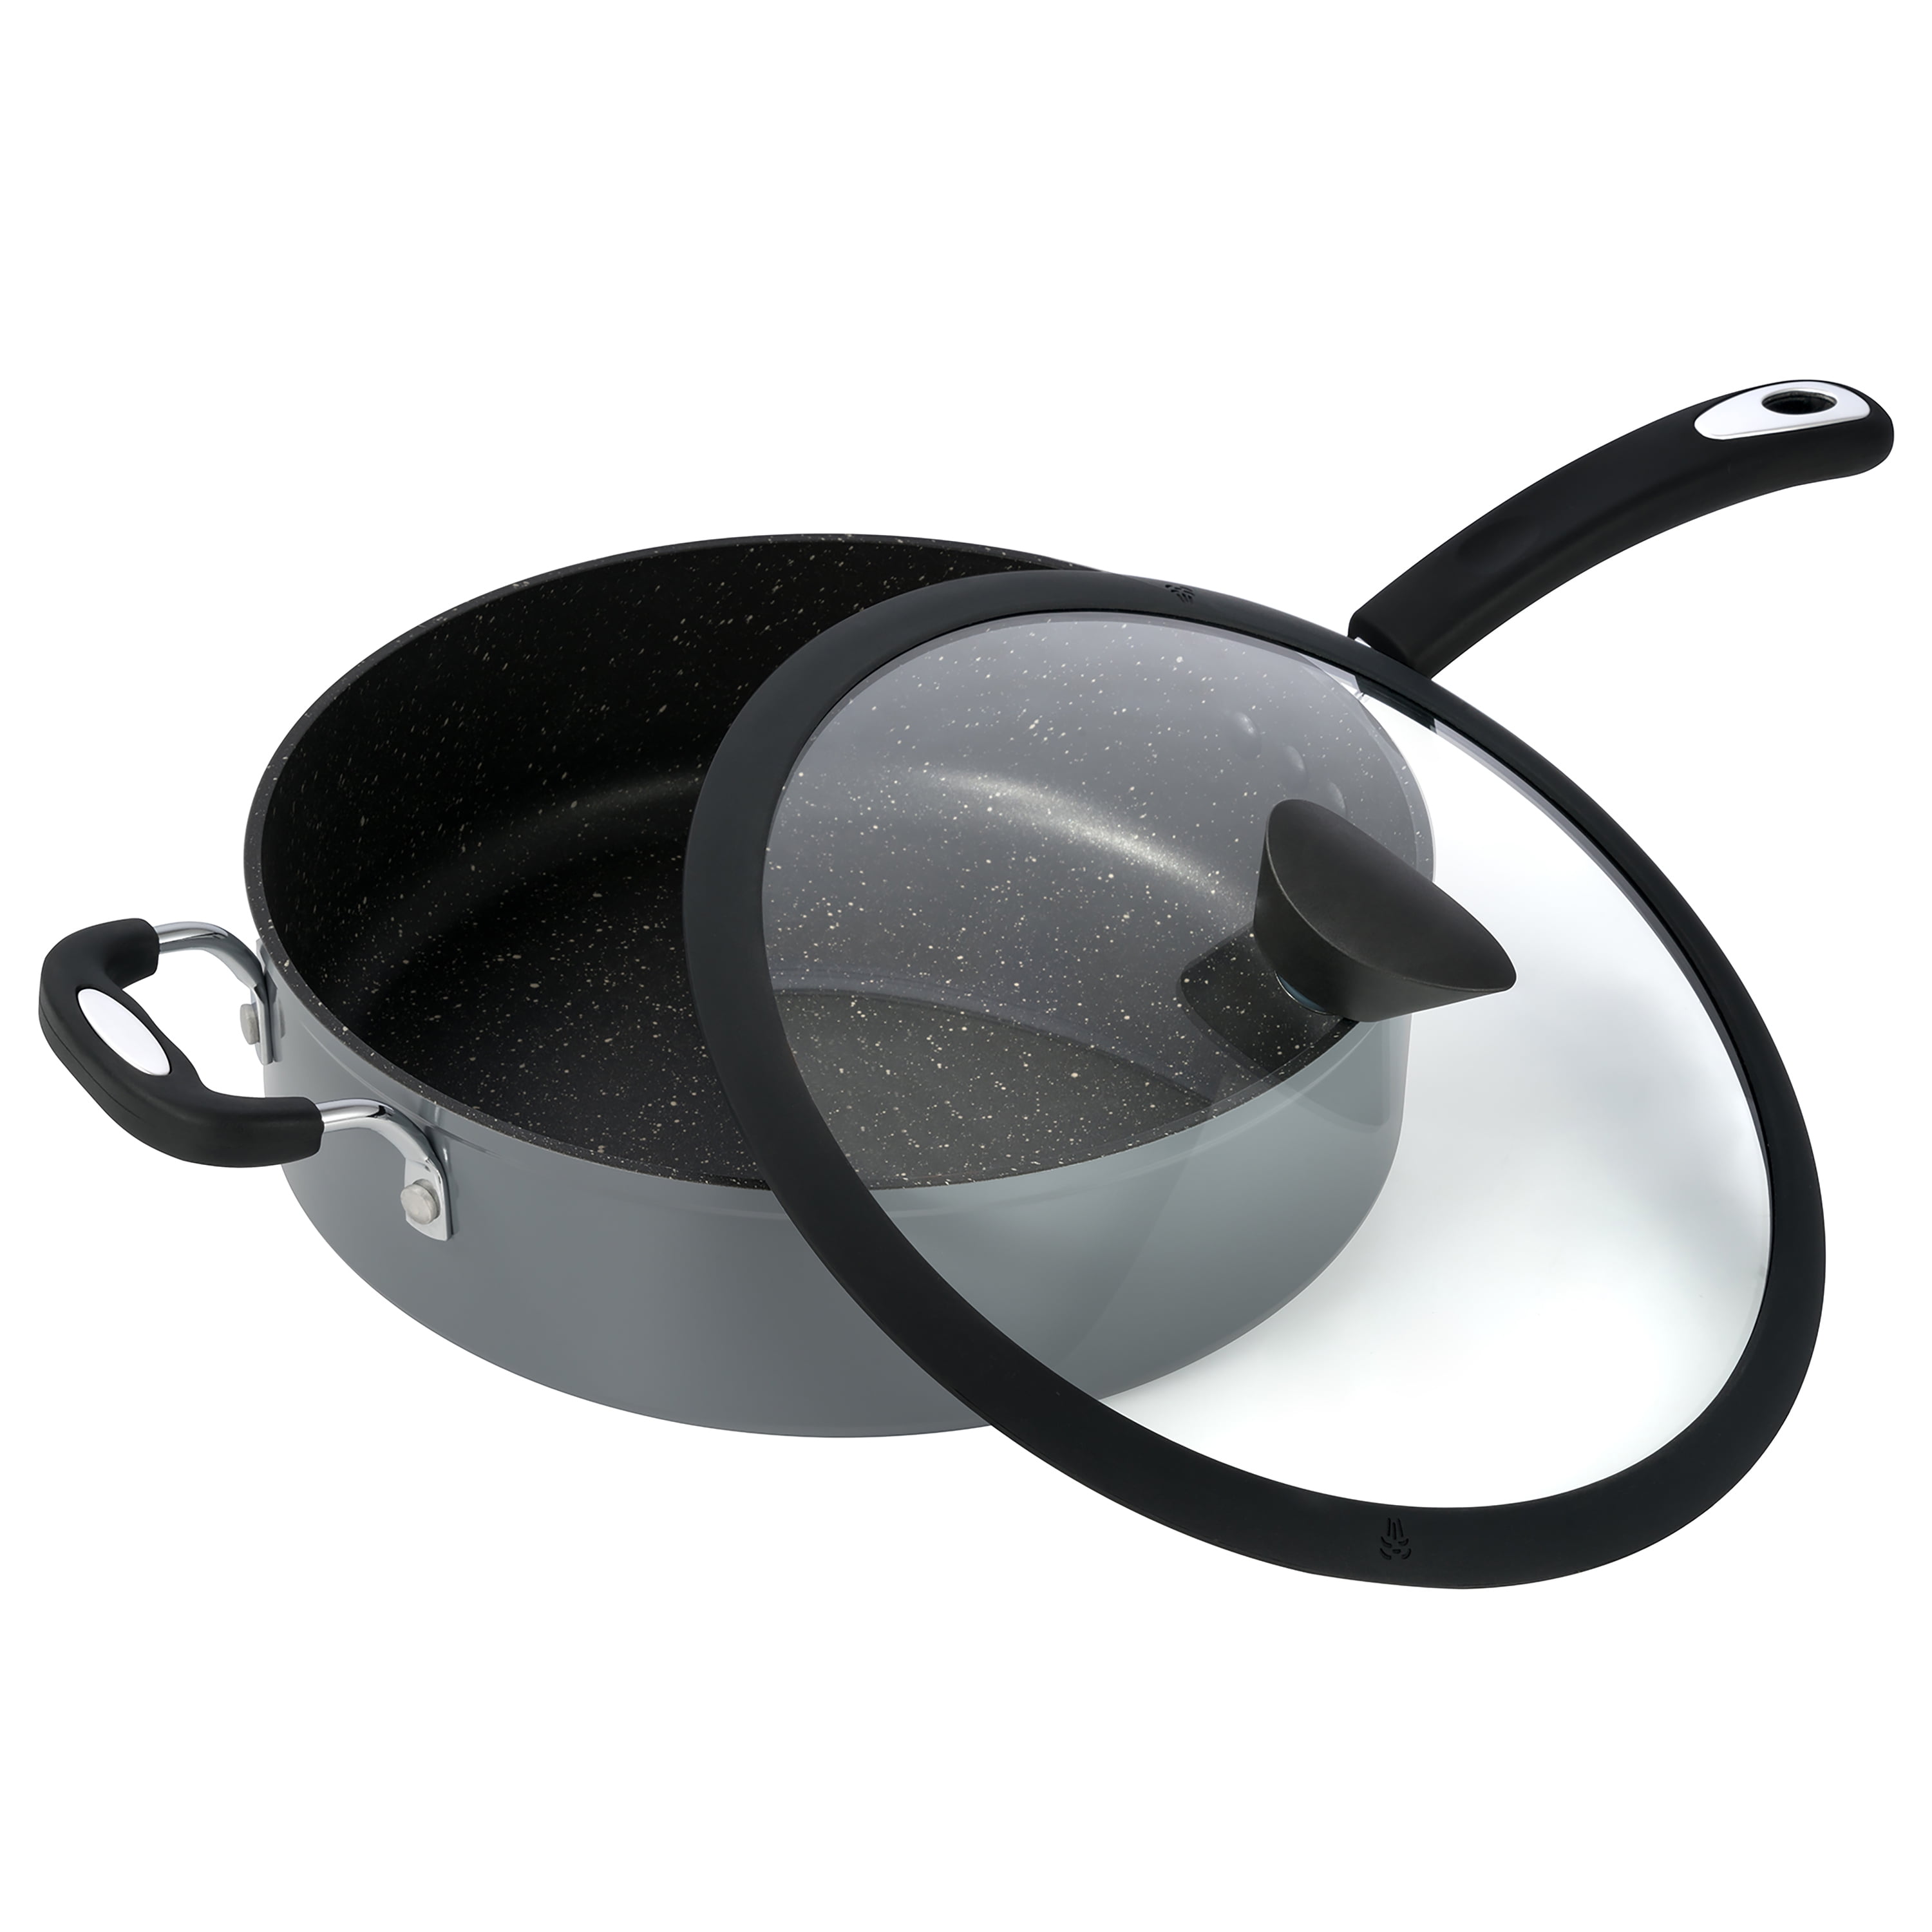 10 Stone Frying Pan by Ozeri, with 100% APEO & PFOA-Free Stone-Derived  Non-Stick Coating from Germany 